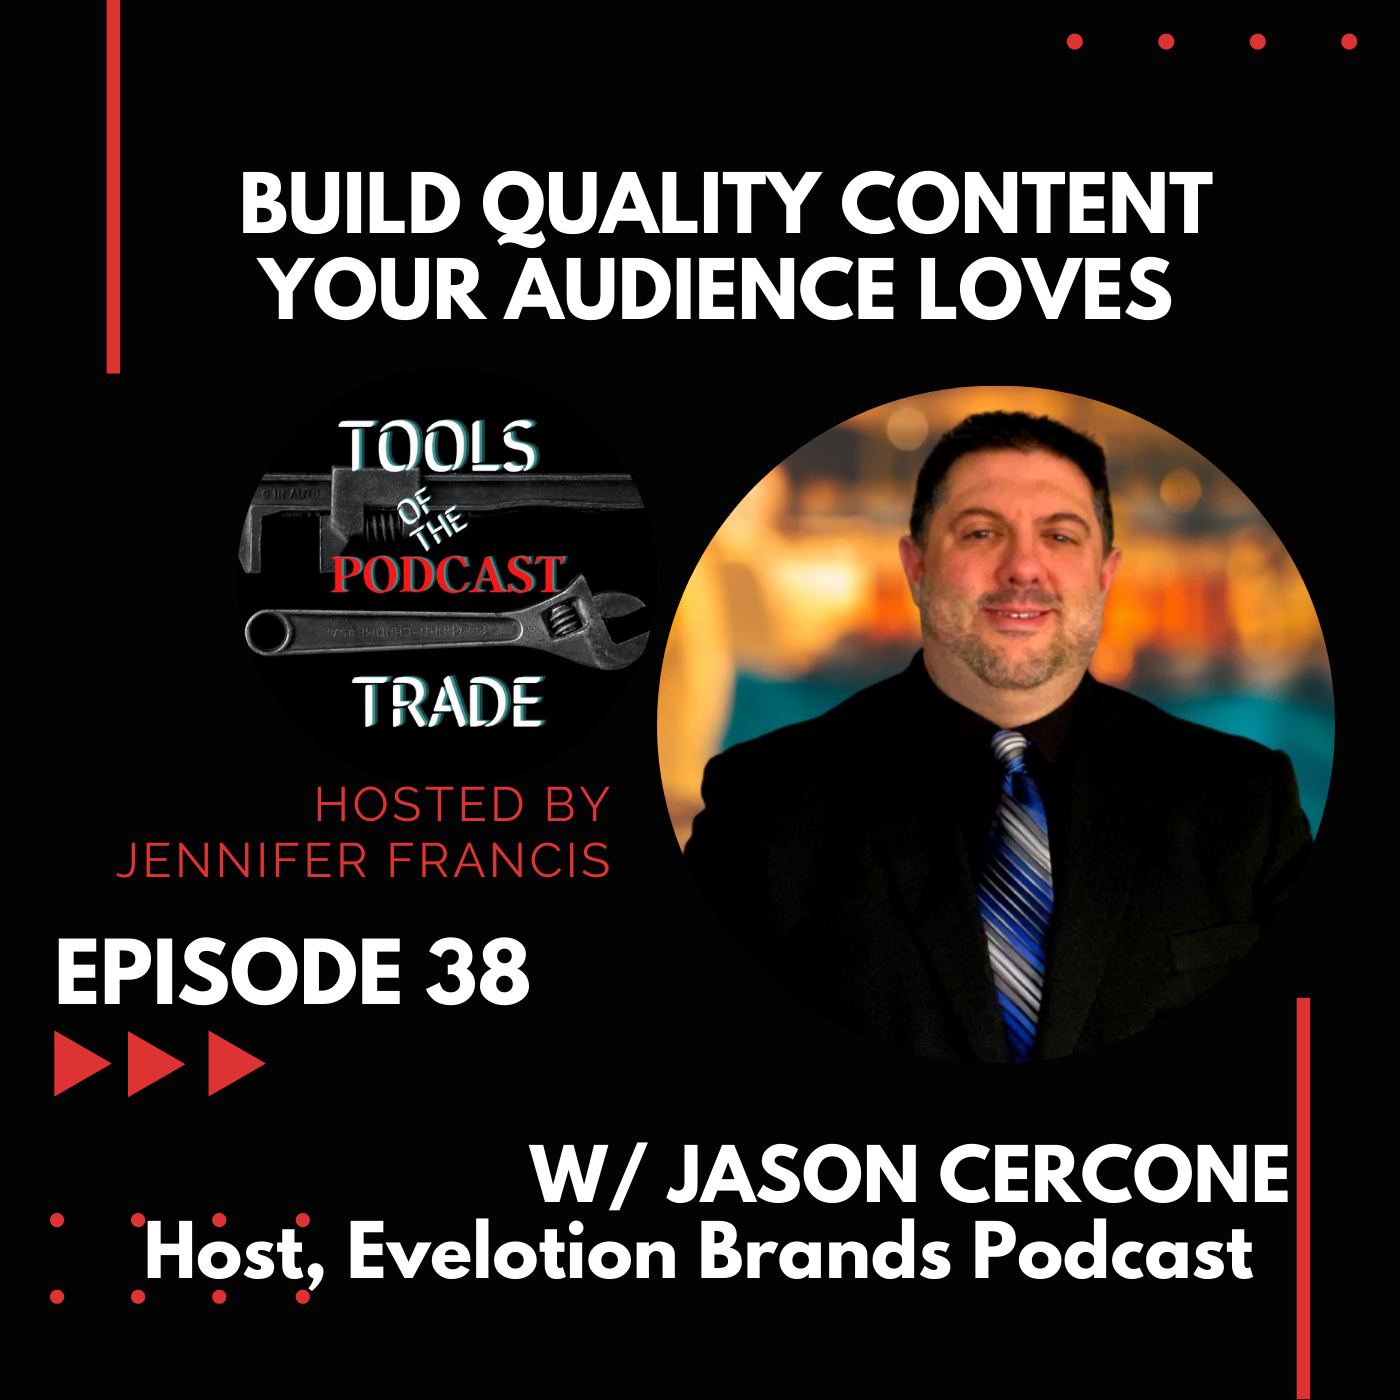 Build Quality Content Your Audience Loves w/Jason Cercone